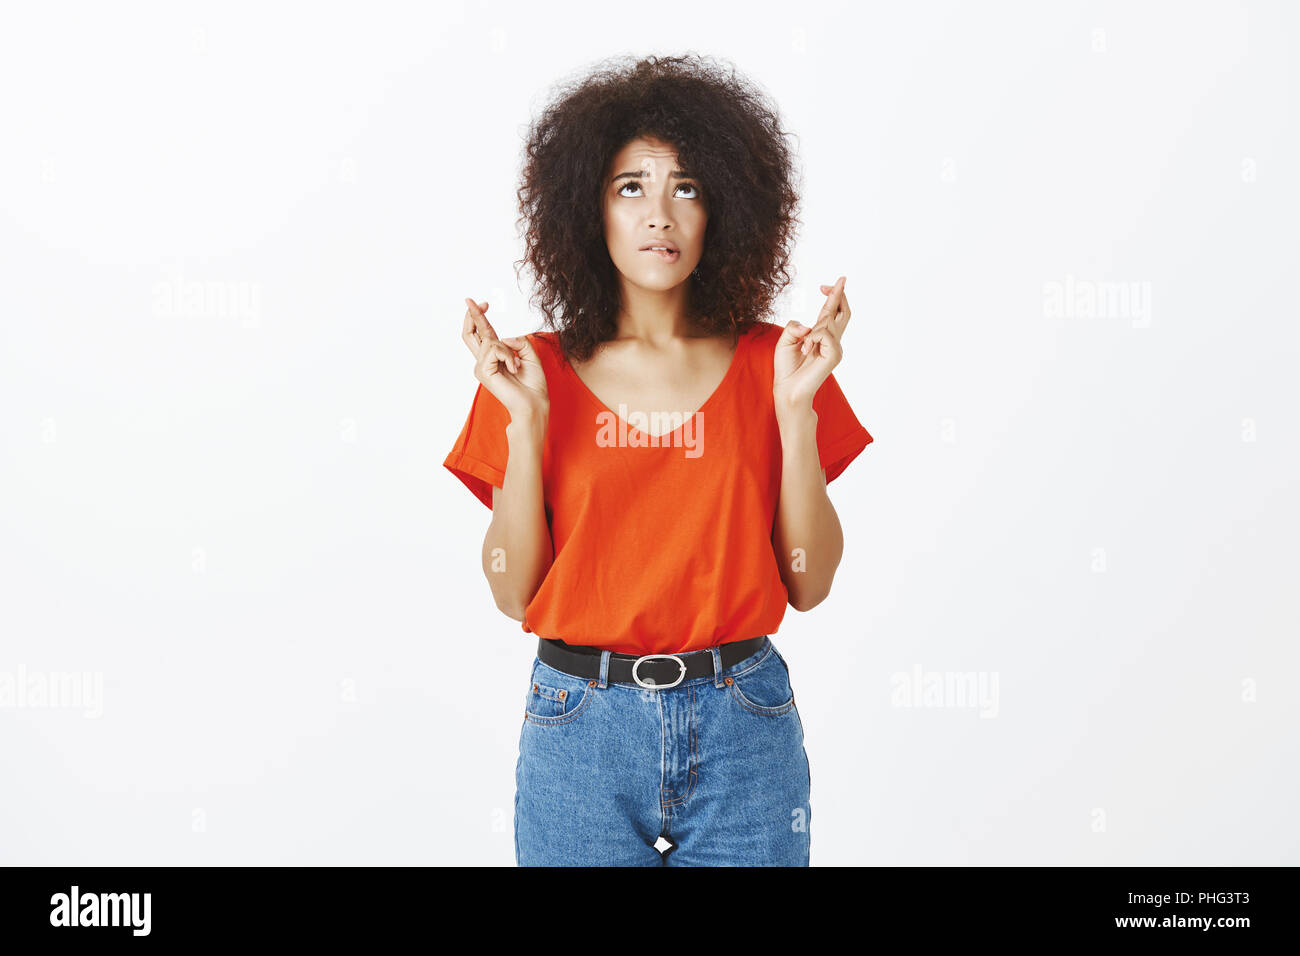 Indoor shot of intense worried female student with afro hairstyle, looking up and biting lip, standing with crossed fingers, begging or praying, making wish and wanting something badly Stock Photo